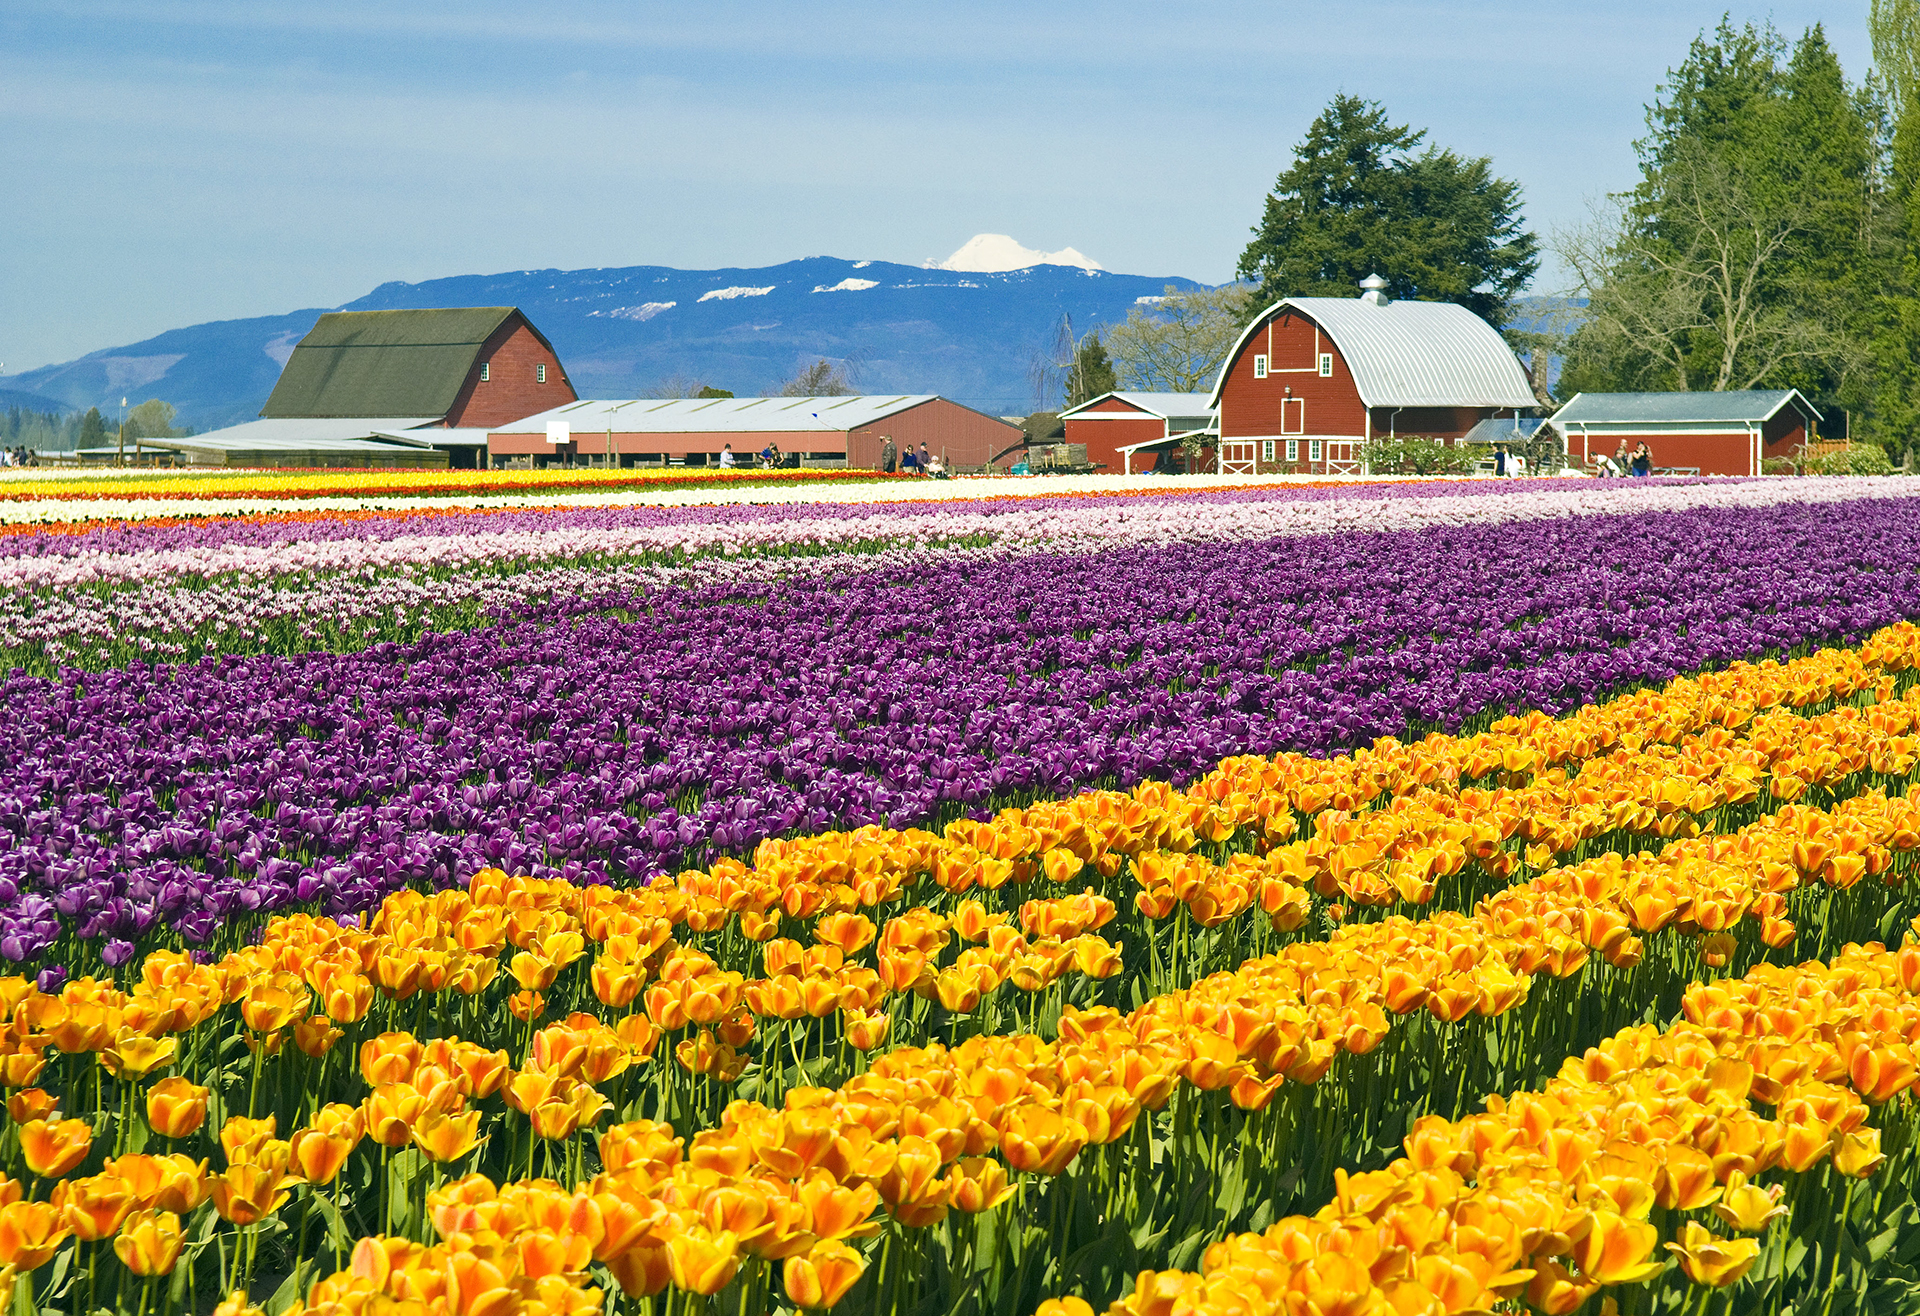 Skagit Valley Tulip Fields Arena Pile Top 10 Most Surreal Places In United States